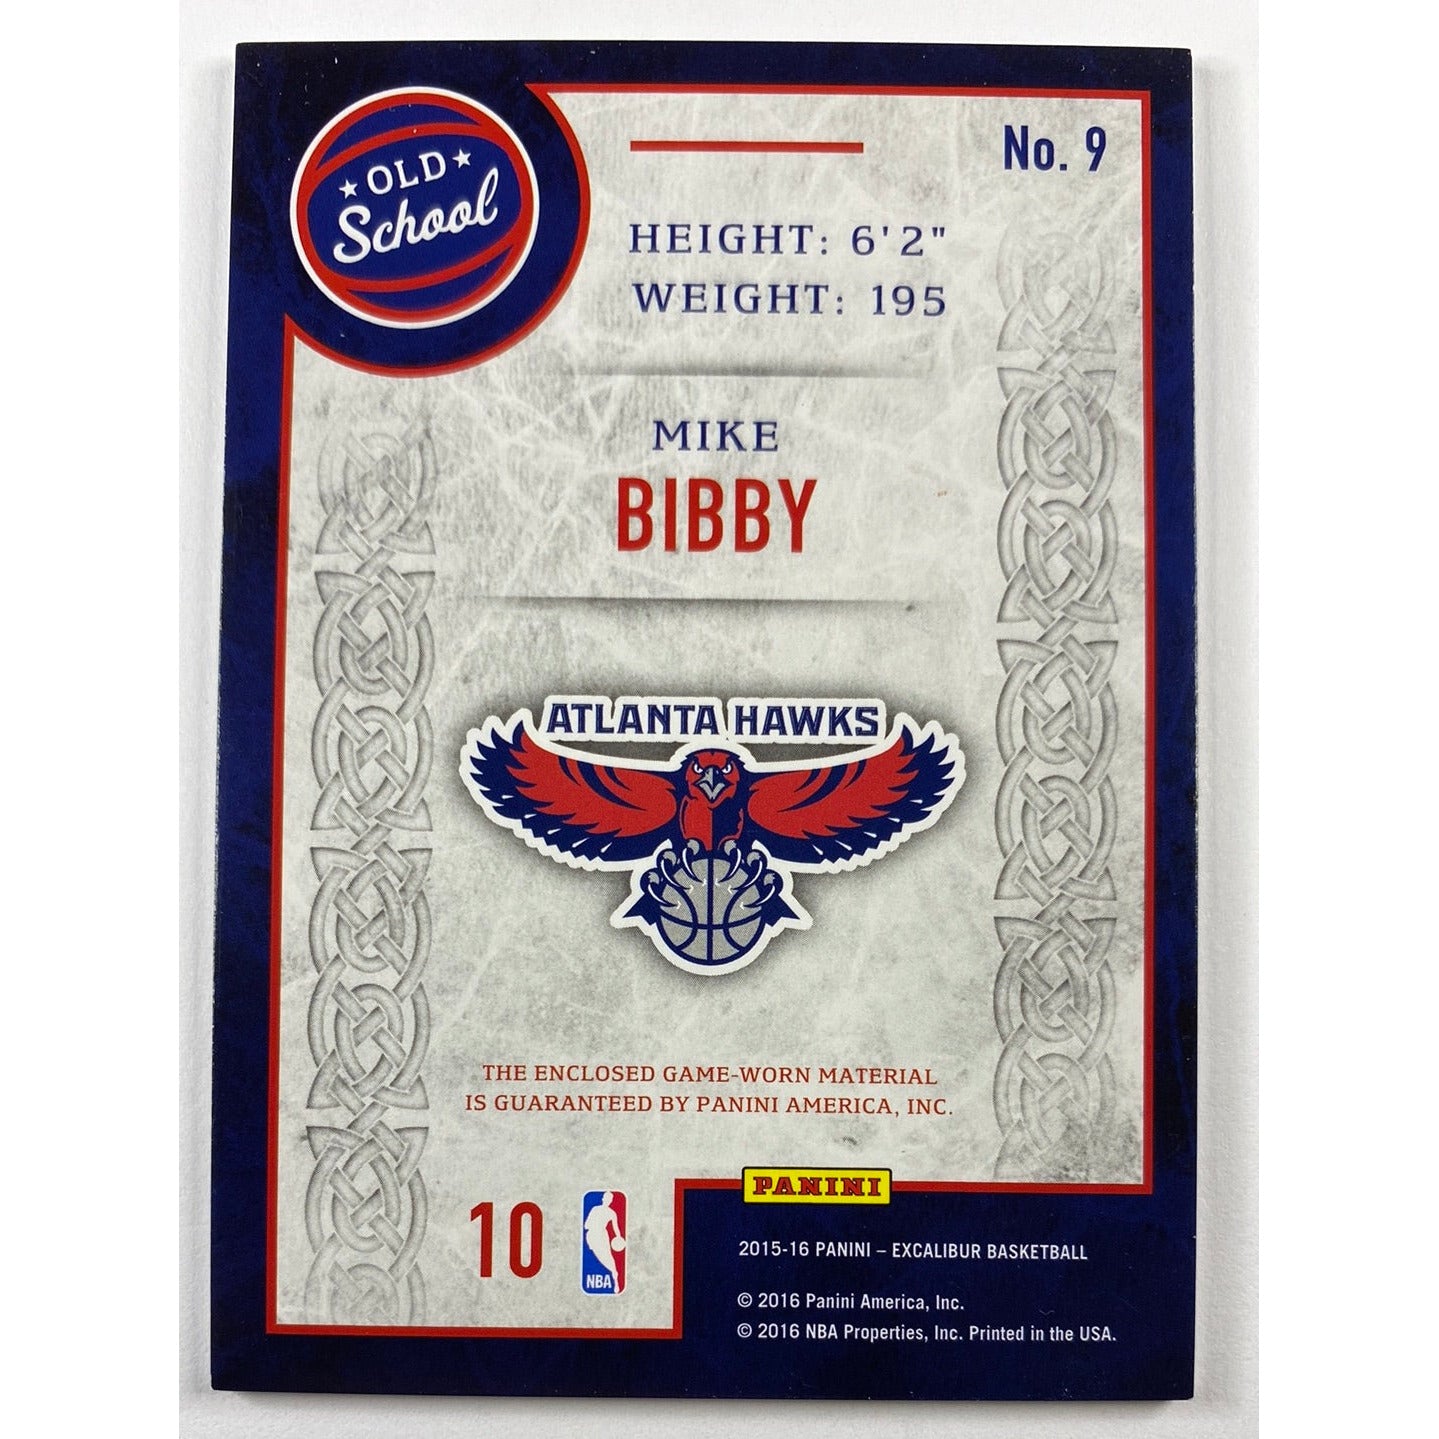 2015-16 Excalibur Mike Bibby Old School Authentic Patch /99